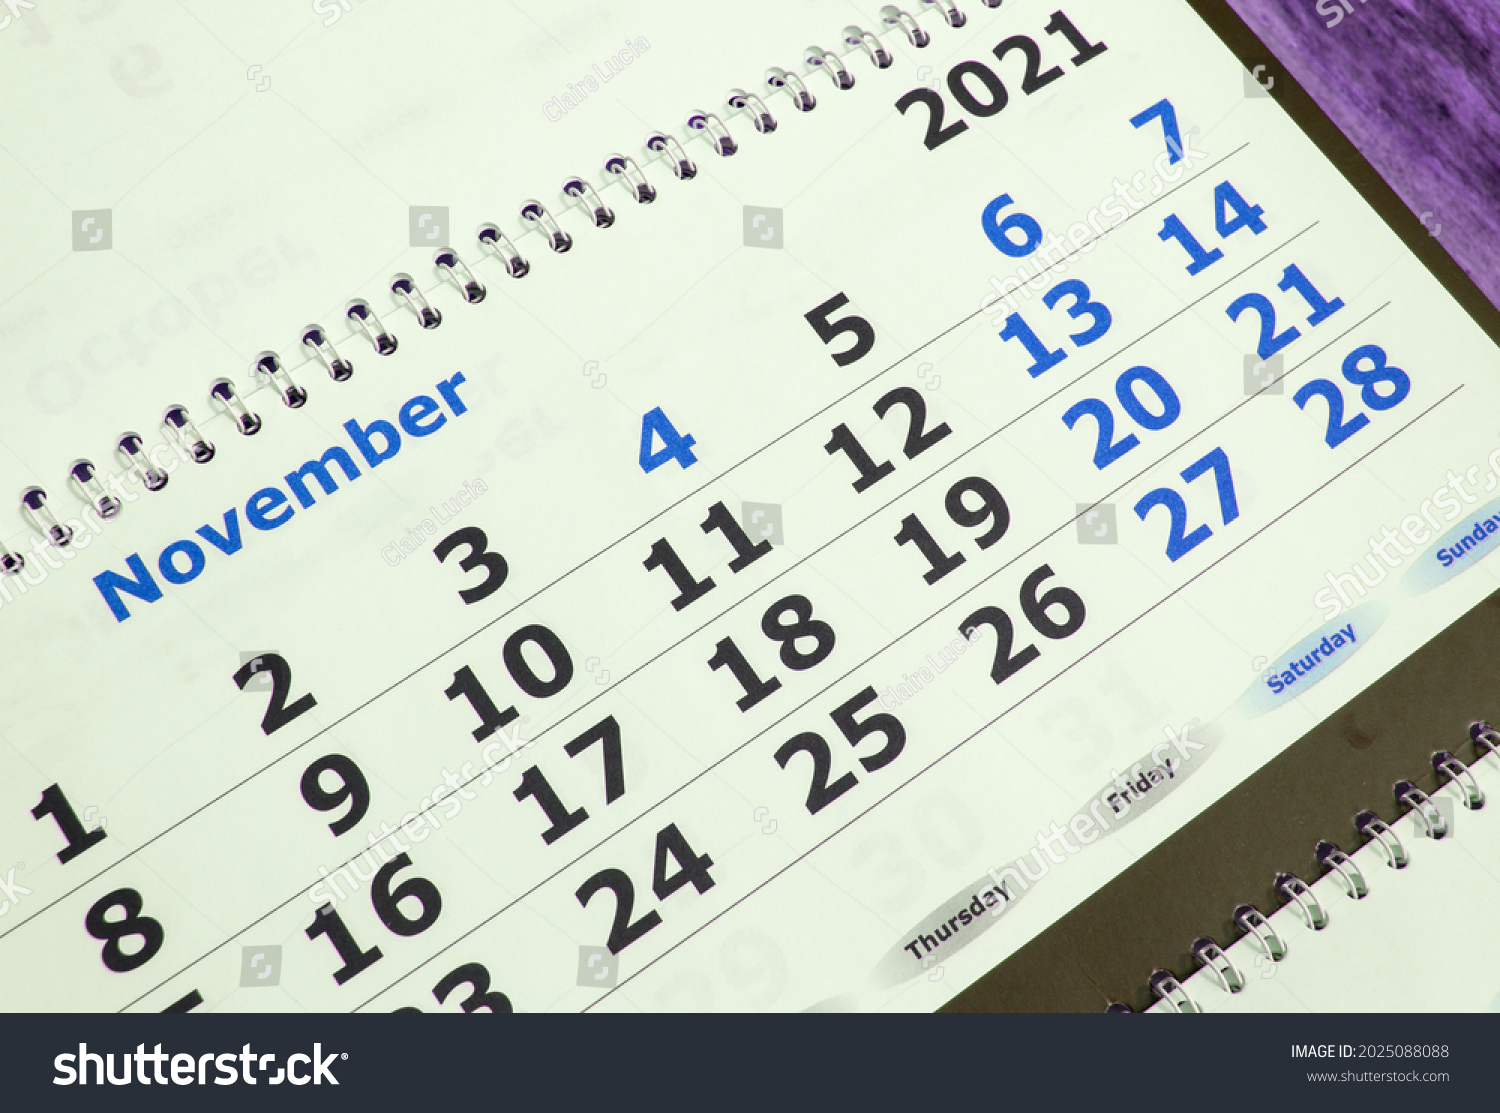 November 2021 on the calendar page, wall calendar, business planning concept. #2025088088